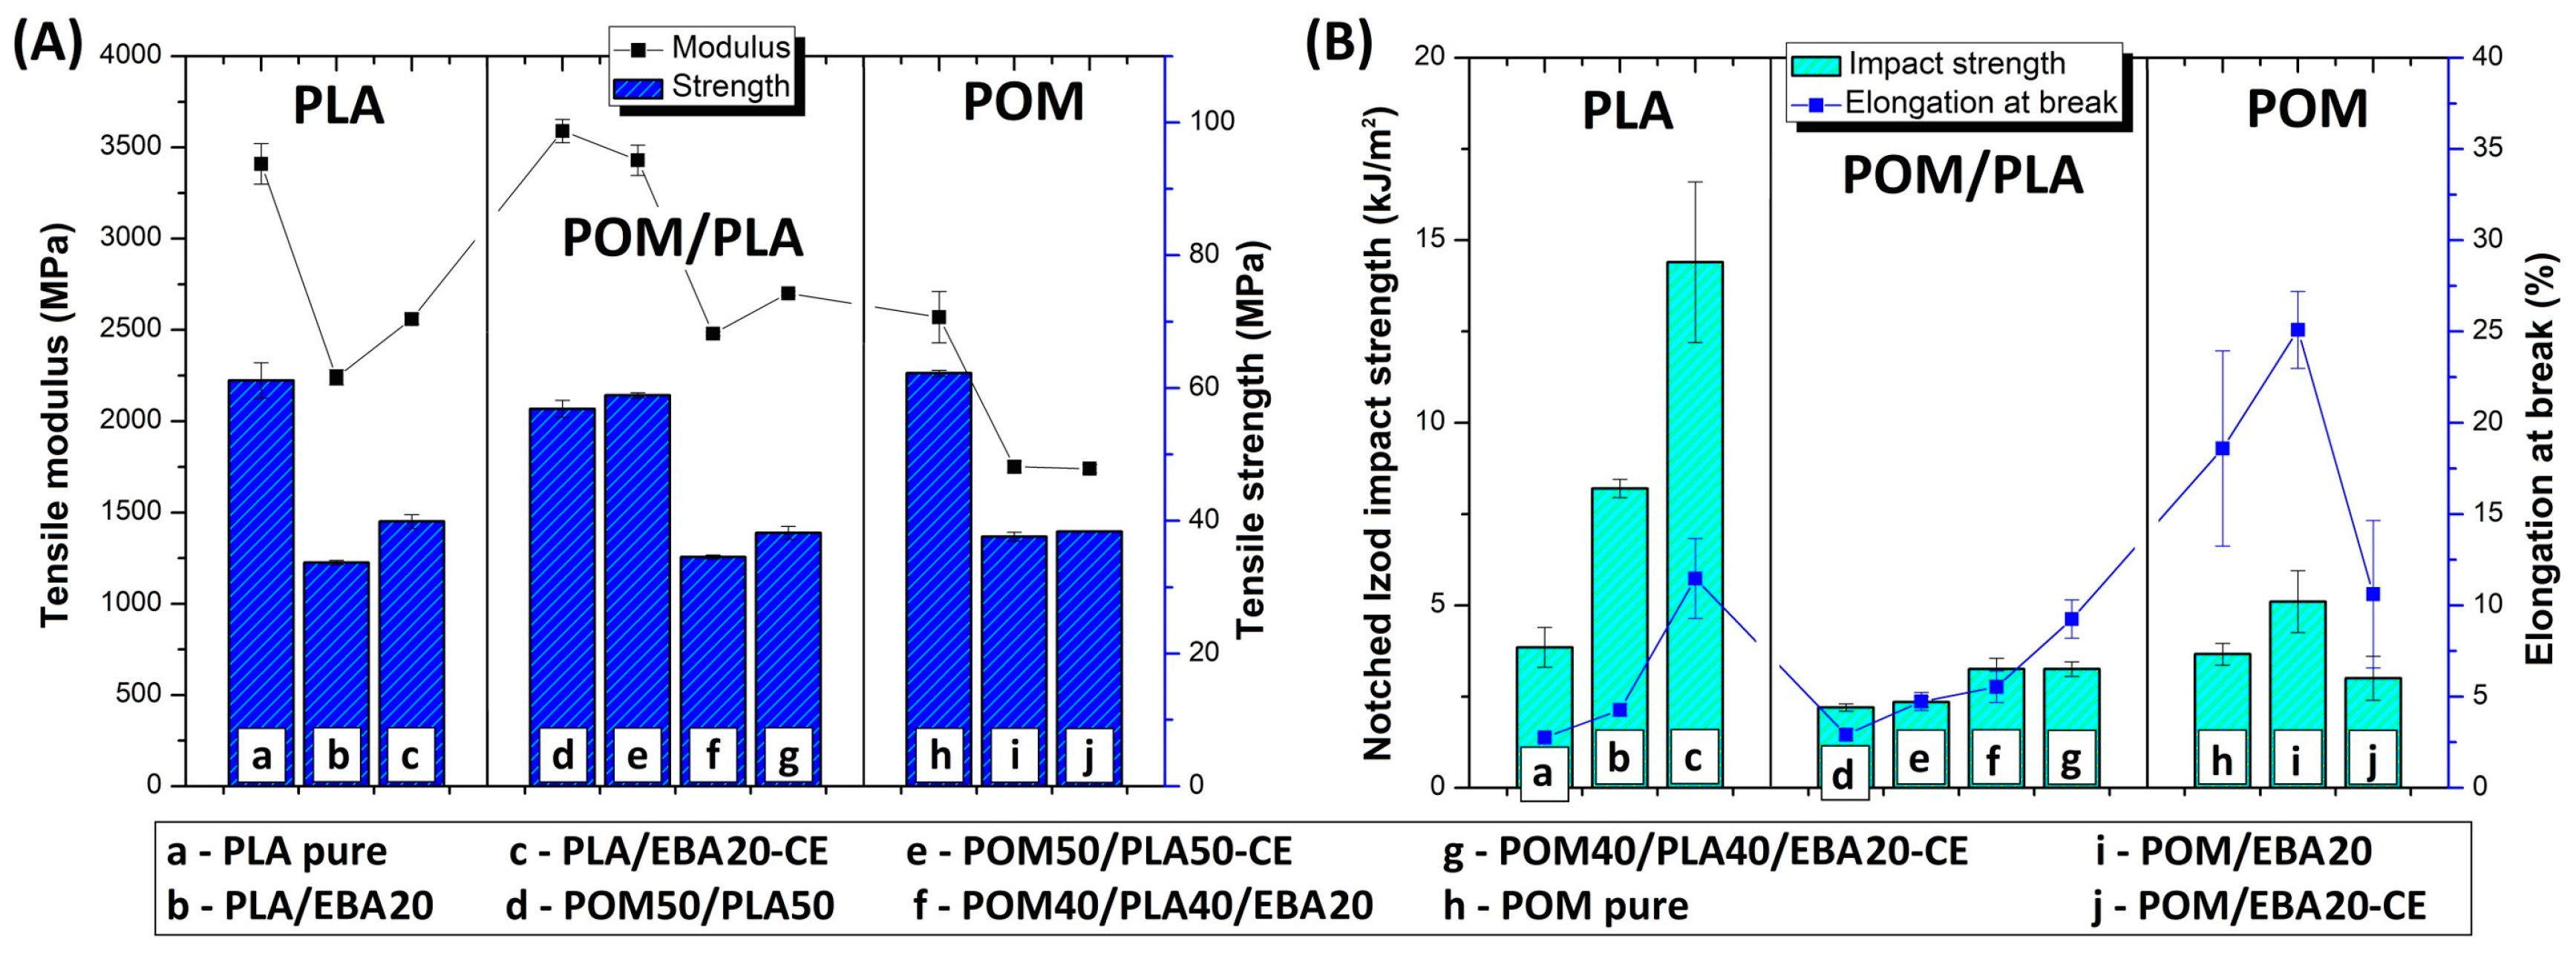 Polymers | Free Full-Text | the Toughness and Thermal Resistance of Polyoxymethylene/Poly(lactic acid) Blends: Evaluation of Properties Correlation Reactive Processing | HTML